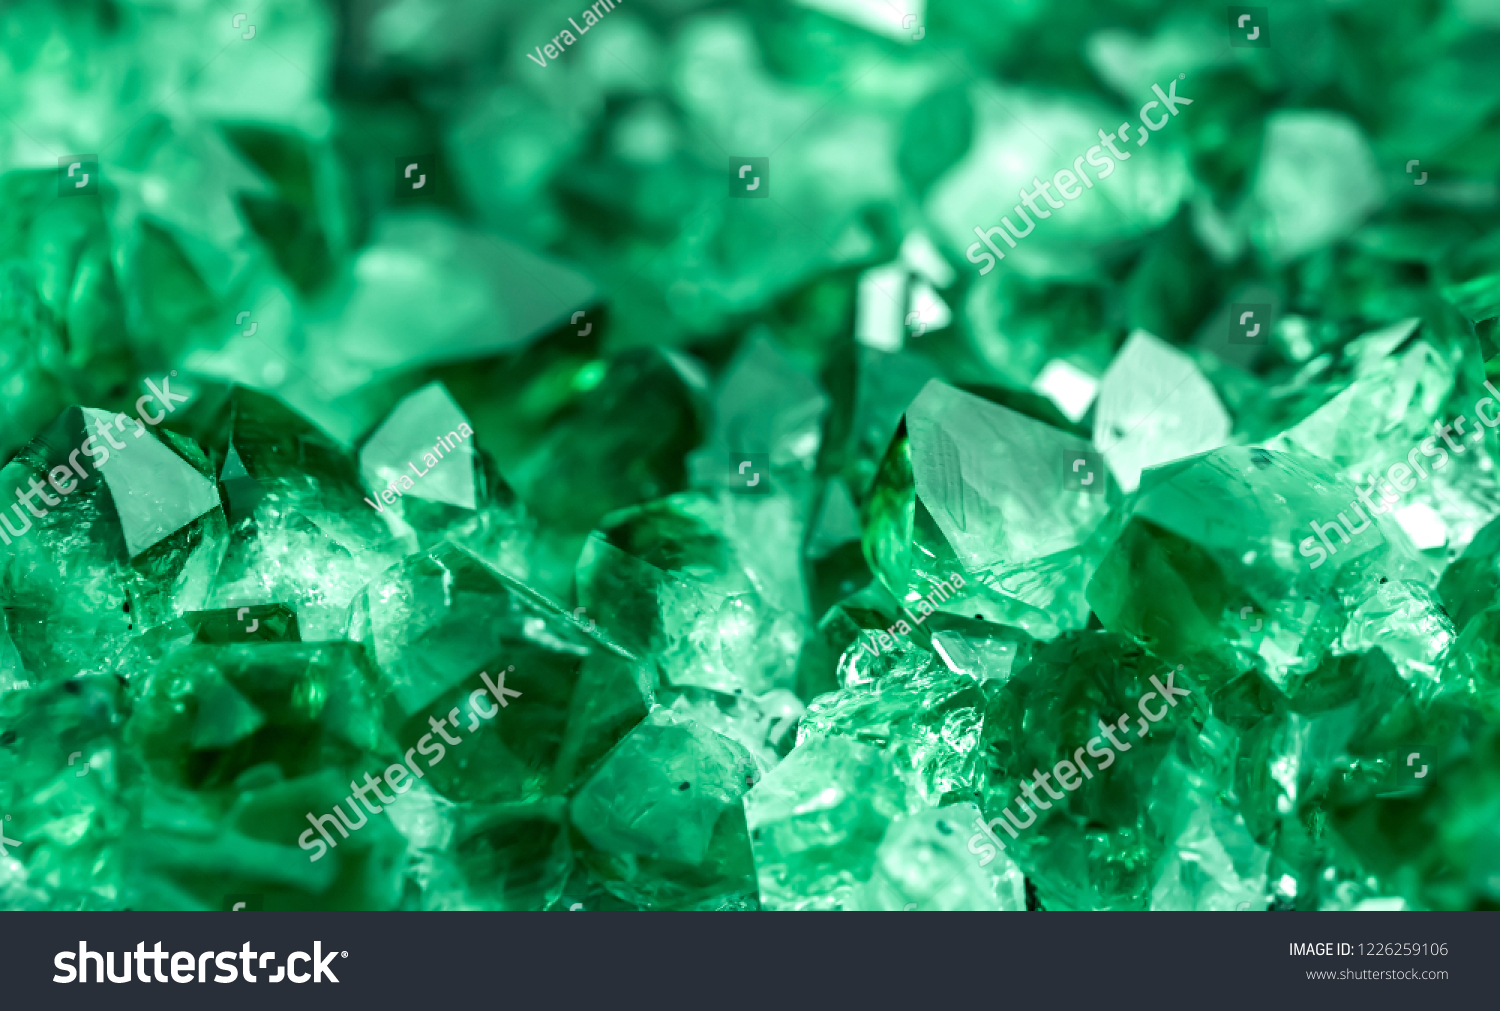 Green crystal mineral stone. Gems. Mineral crystals in the natural environment. Texture of precious and semiprecious stones. Seamless background with copy space colored shiny surface of precious stone #1226259106